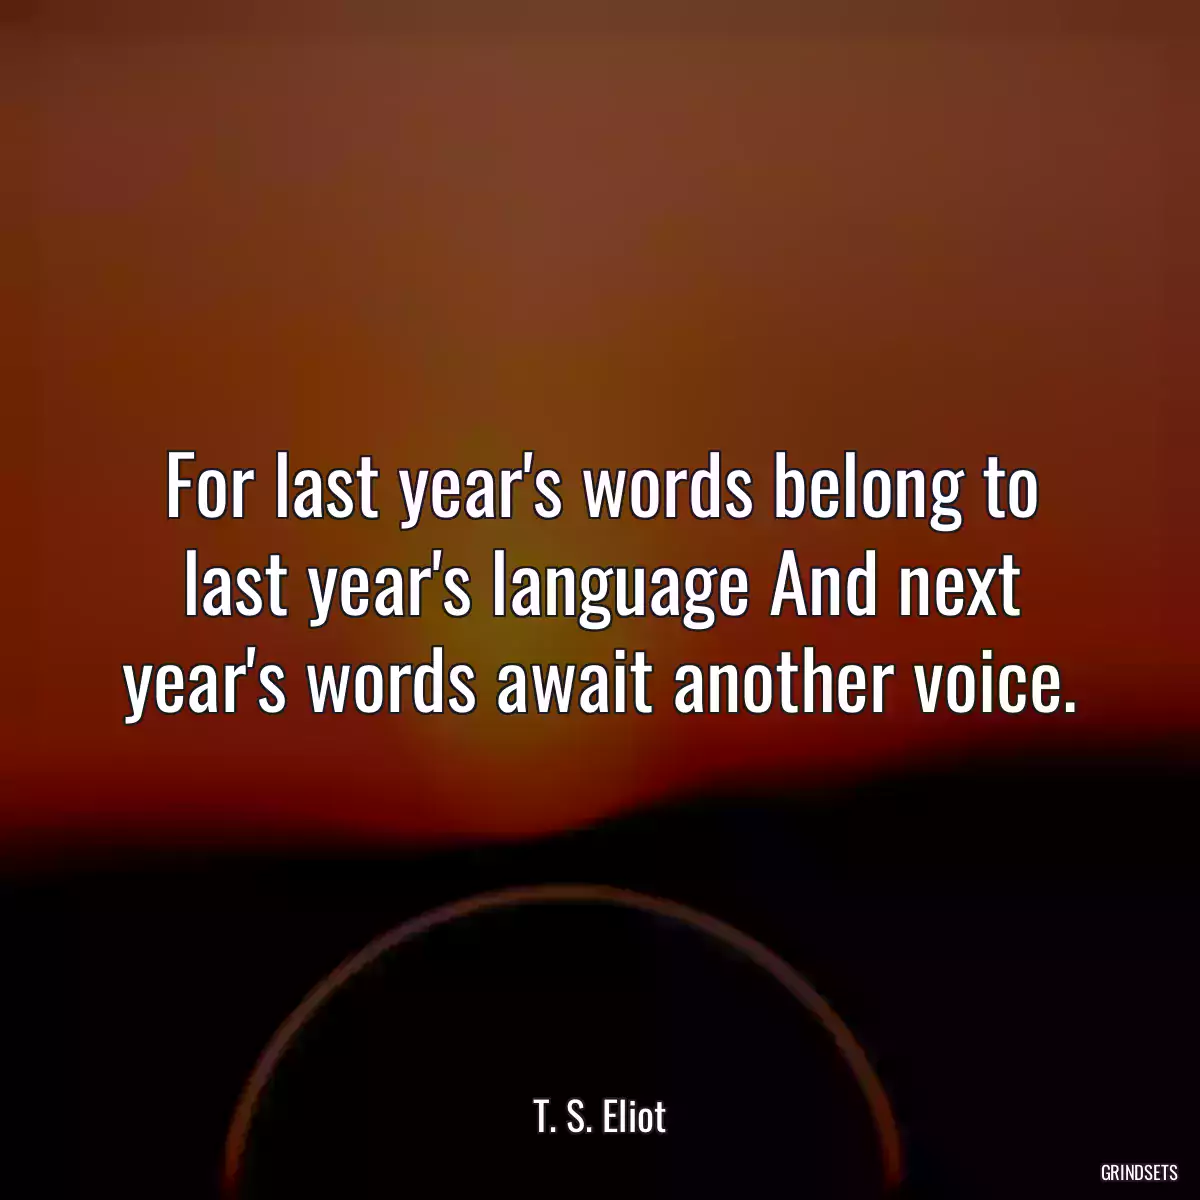 For last year\'s words belong to last year\'s language And next year\'s words await another voice.